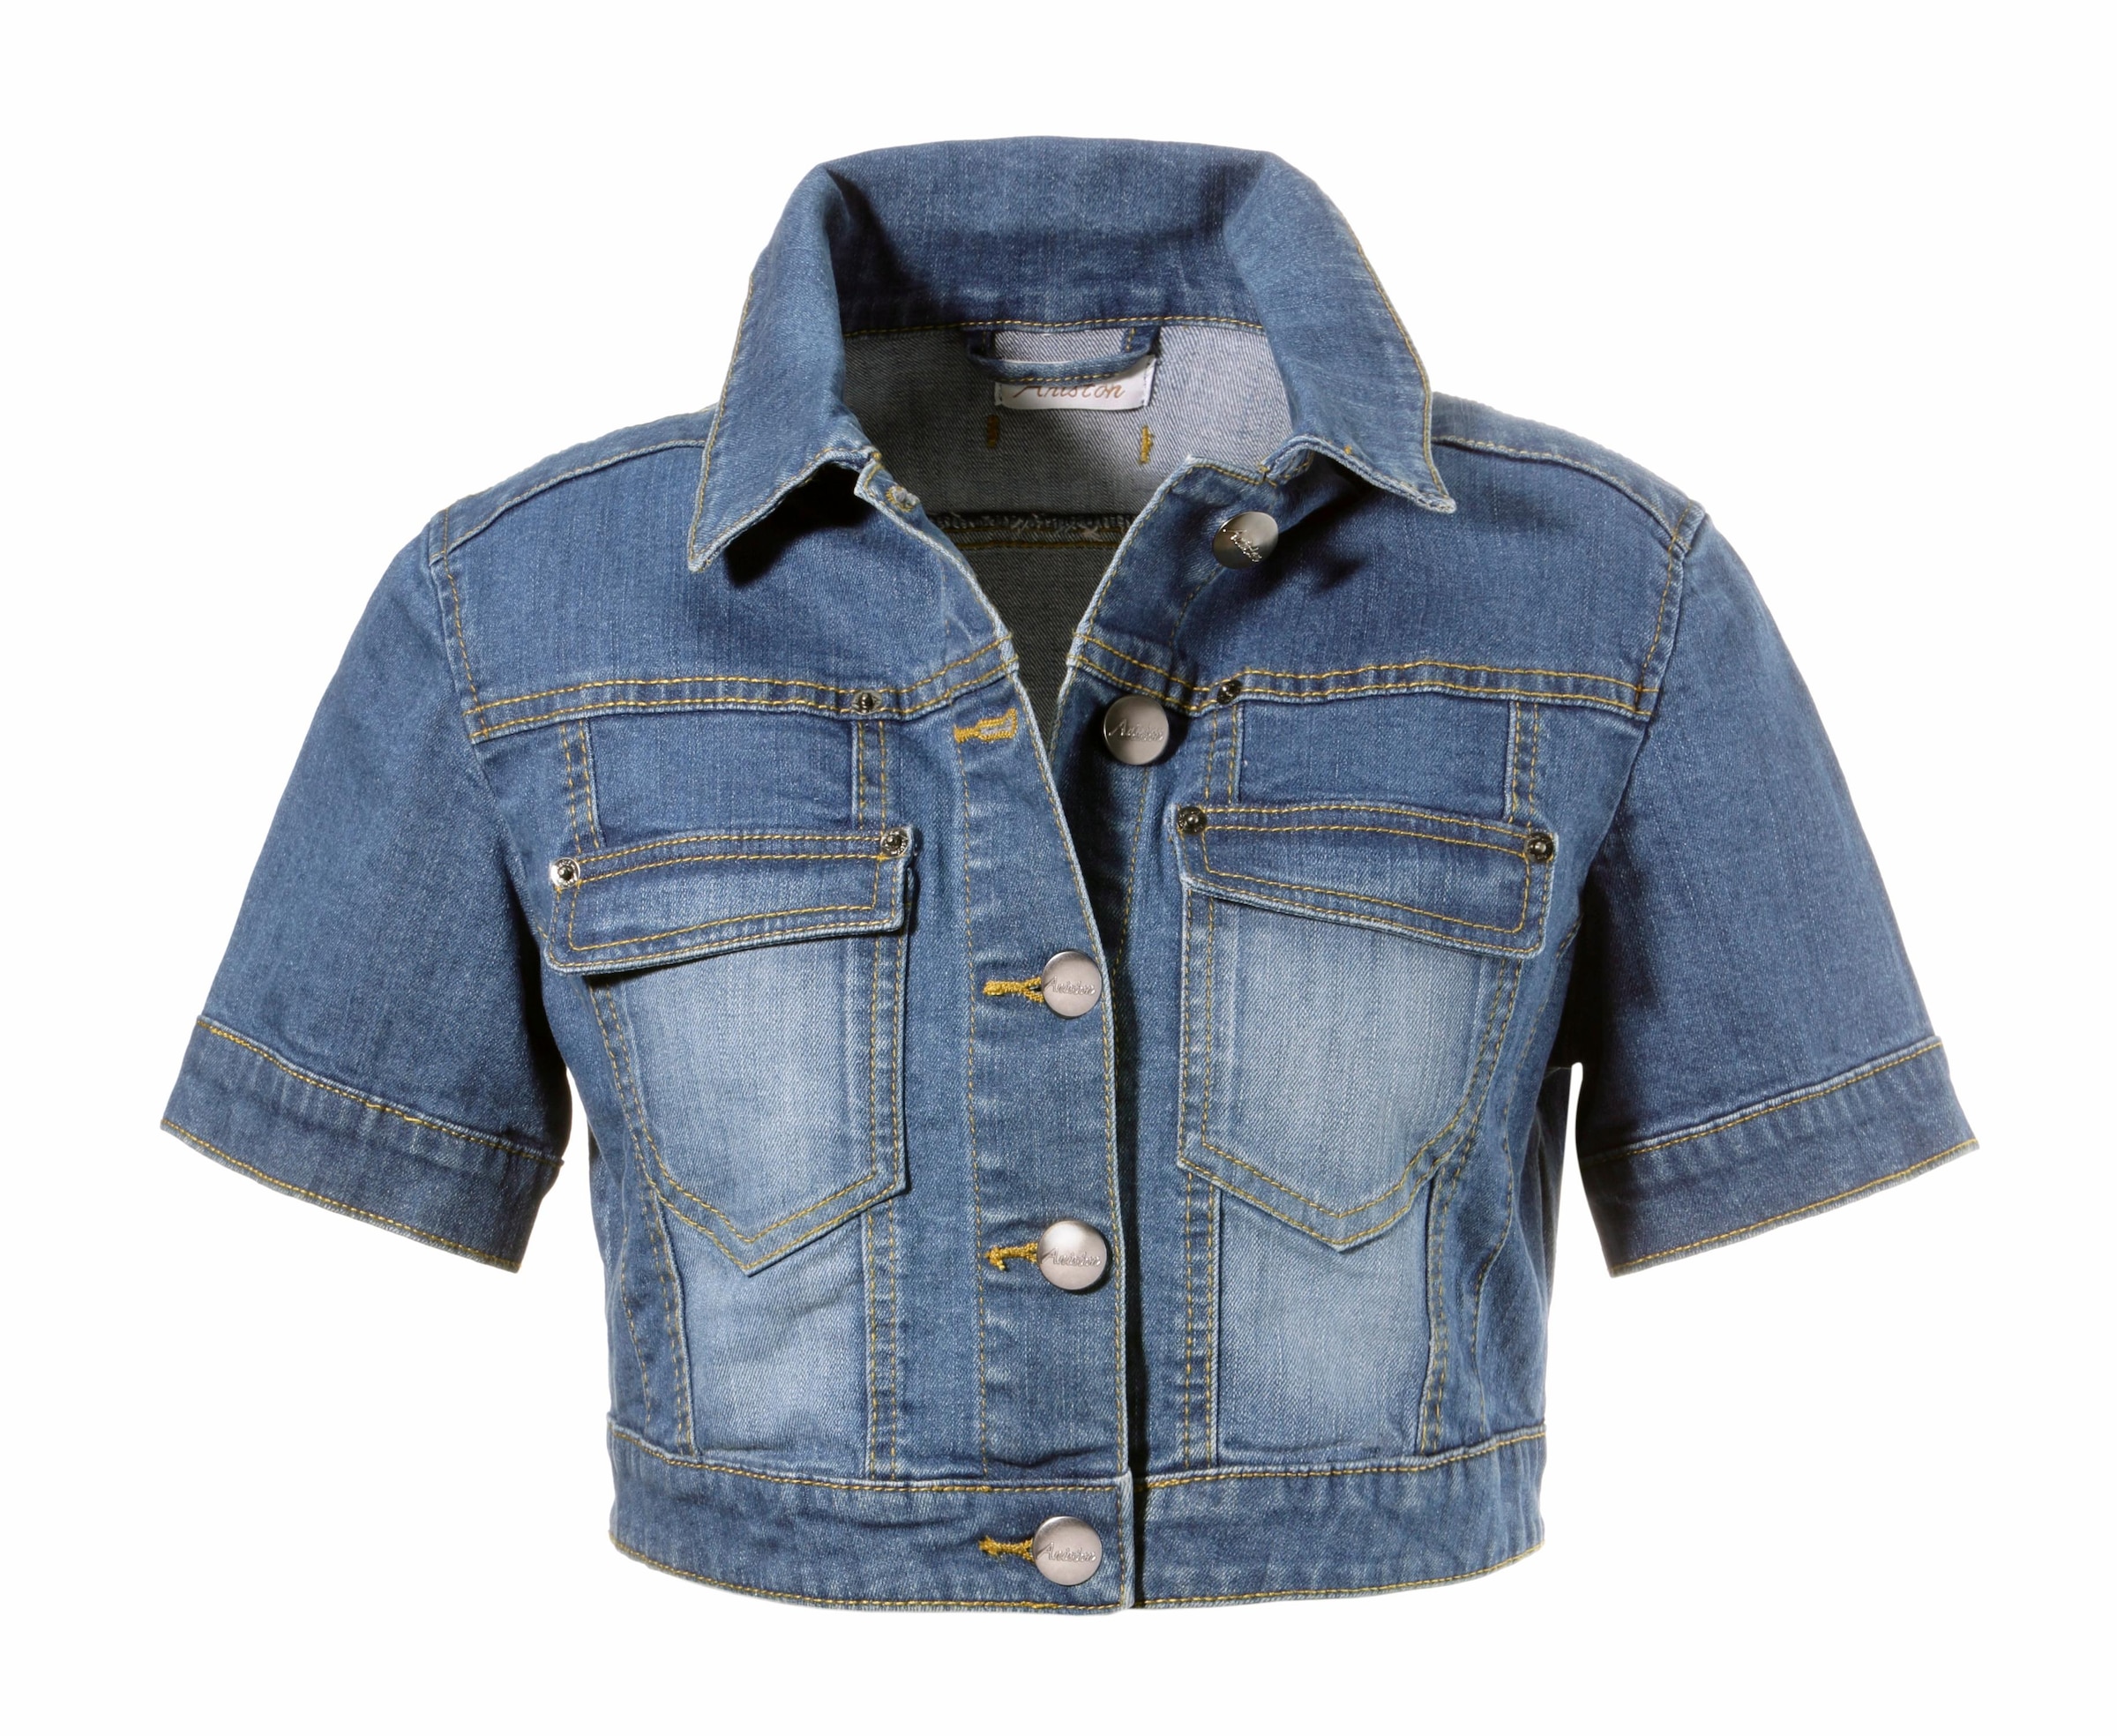 Used-Washung in Aniston kaufen Jeansjacke, CASUAL